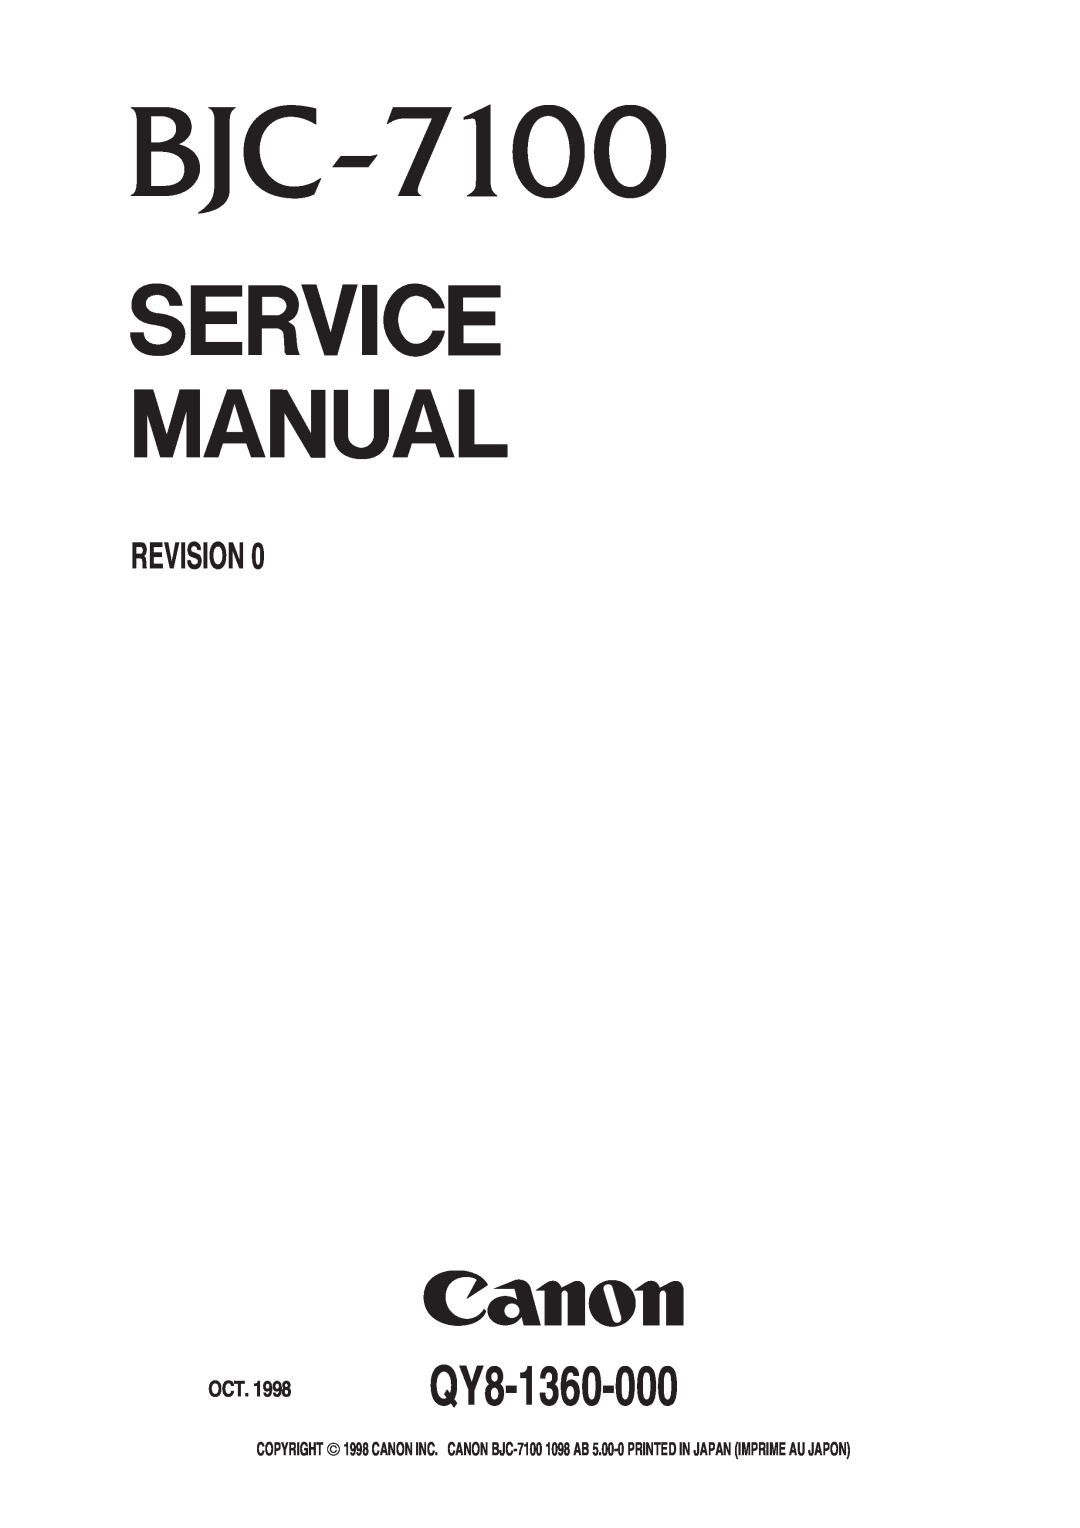 Canon manual OCT. 1998QY8-1360-000, Revision 